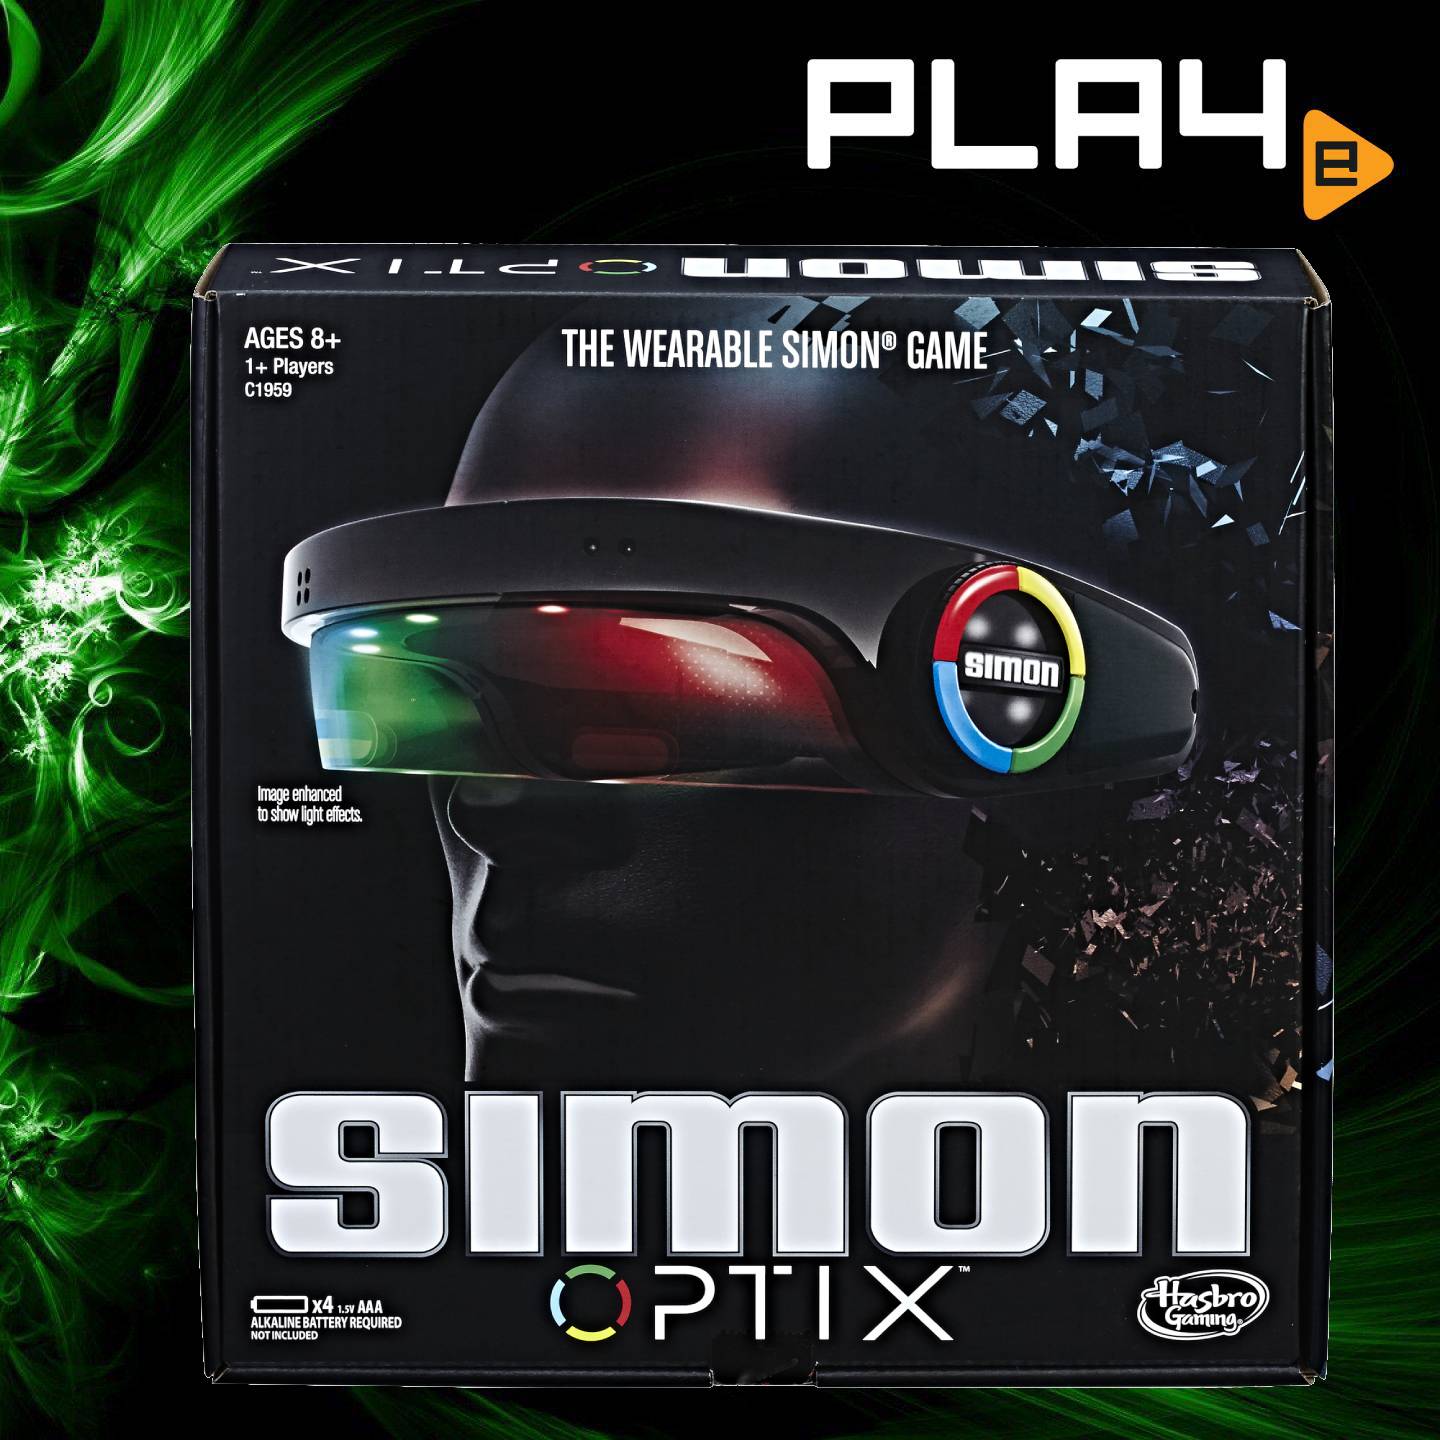 Simon Game by Hasbro, for Ages 8 and Up, for 1 or More players